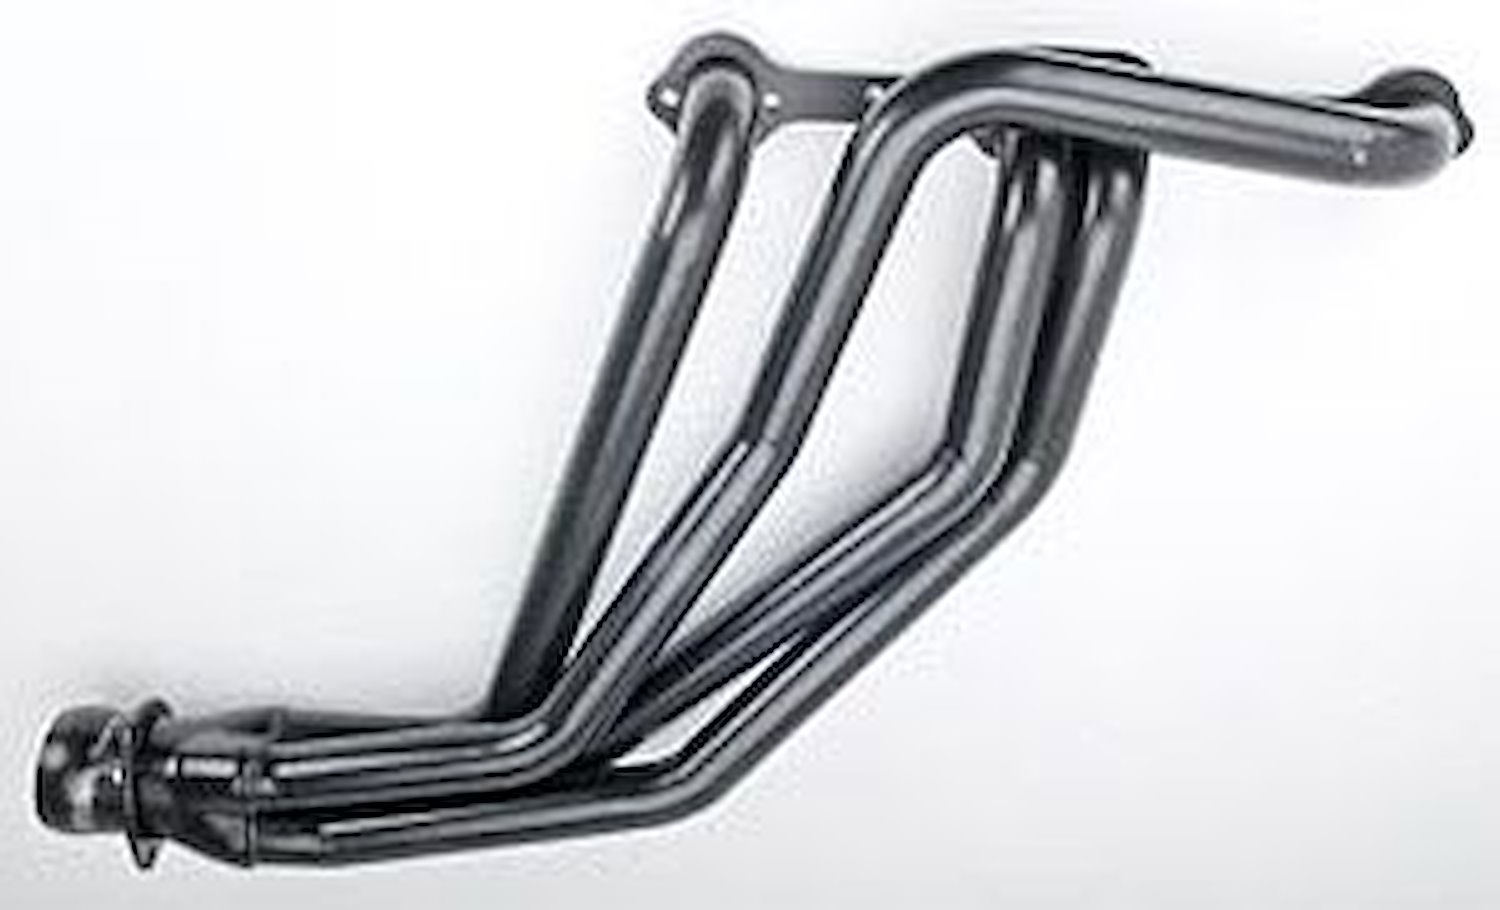 Standard Duty Uncoated Full Length Headers for 1967-91 Chevy/GMC Pickup,Blazer,Jimmy,Suburban